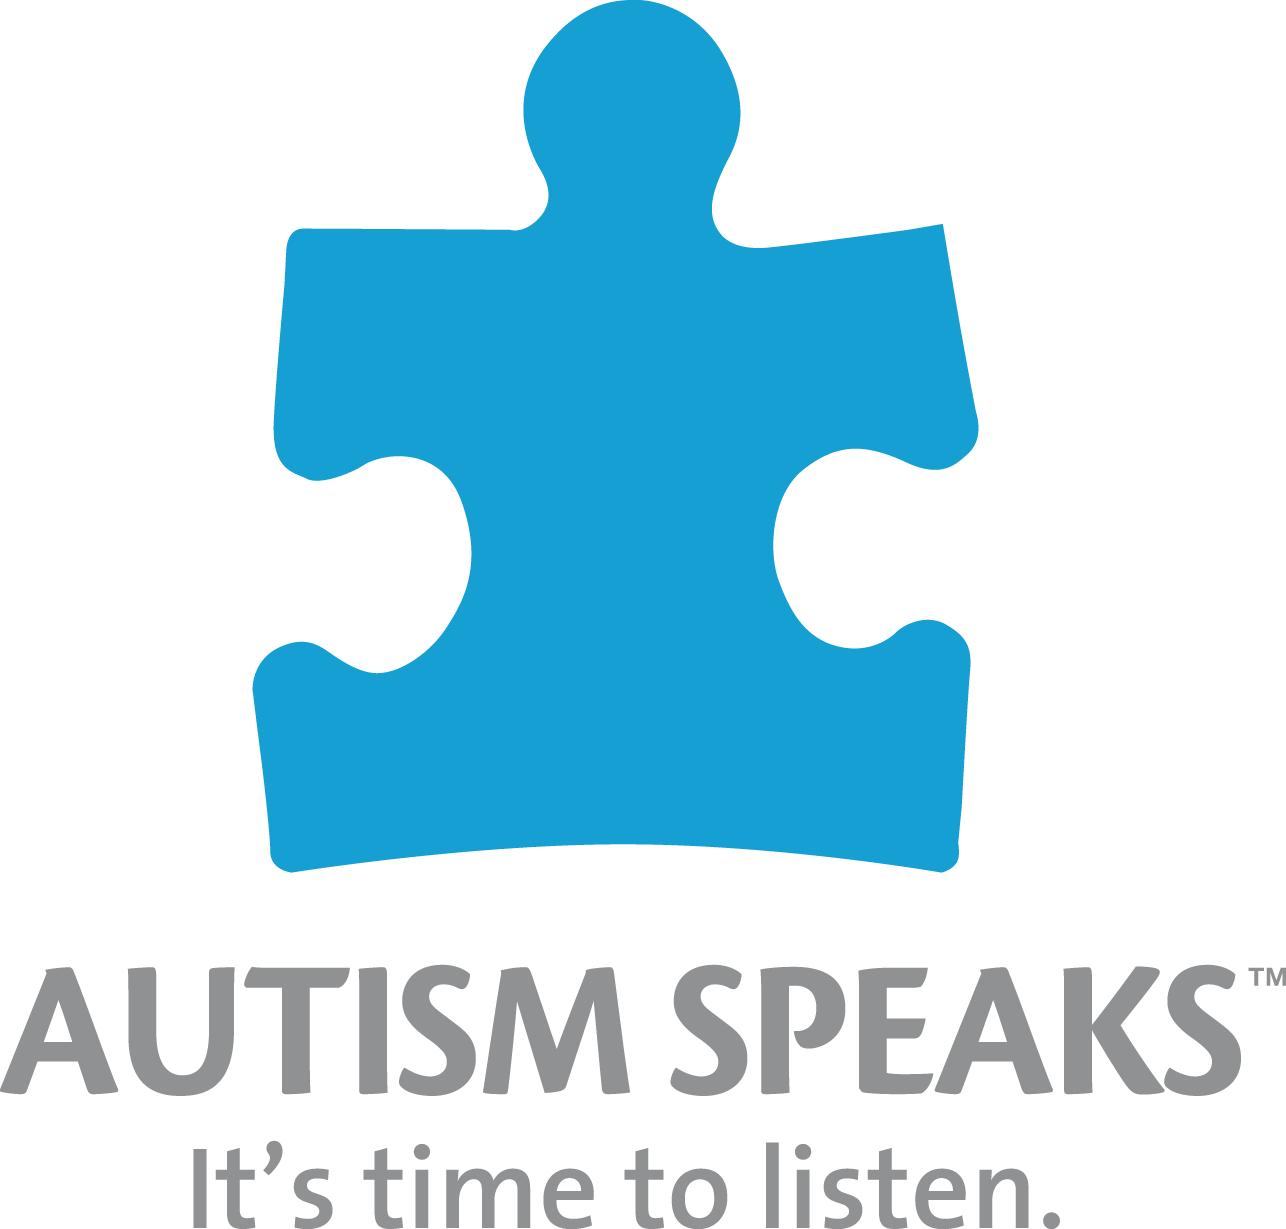 Autism Speaks. It's time to listen.